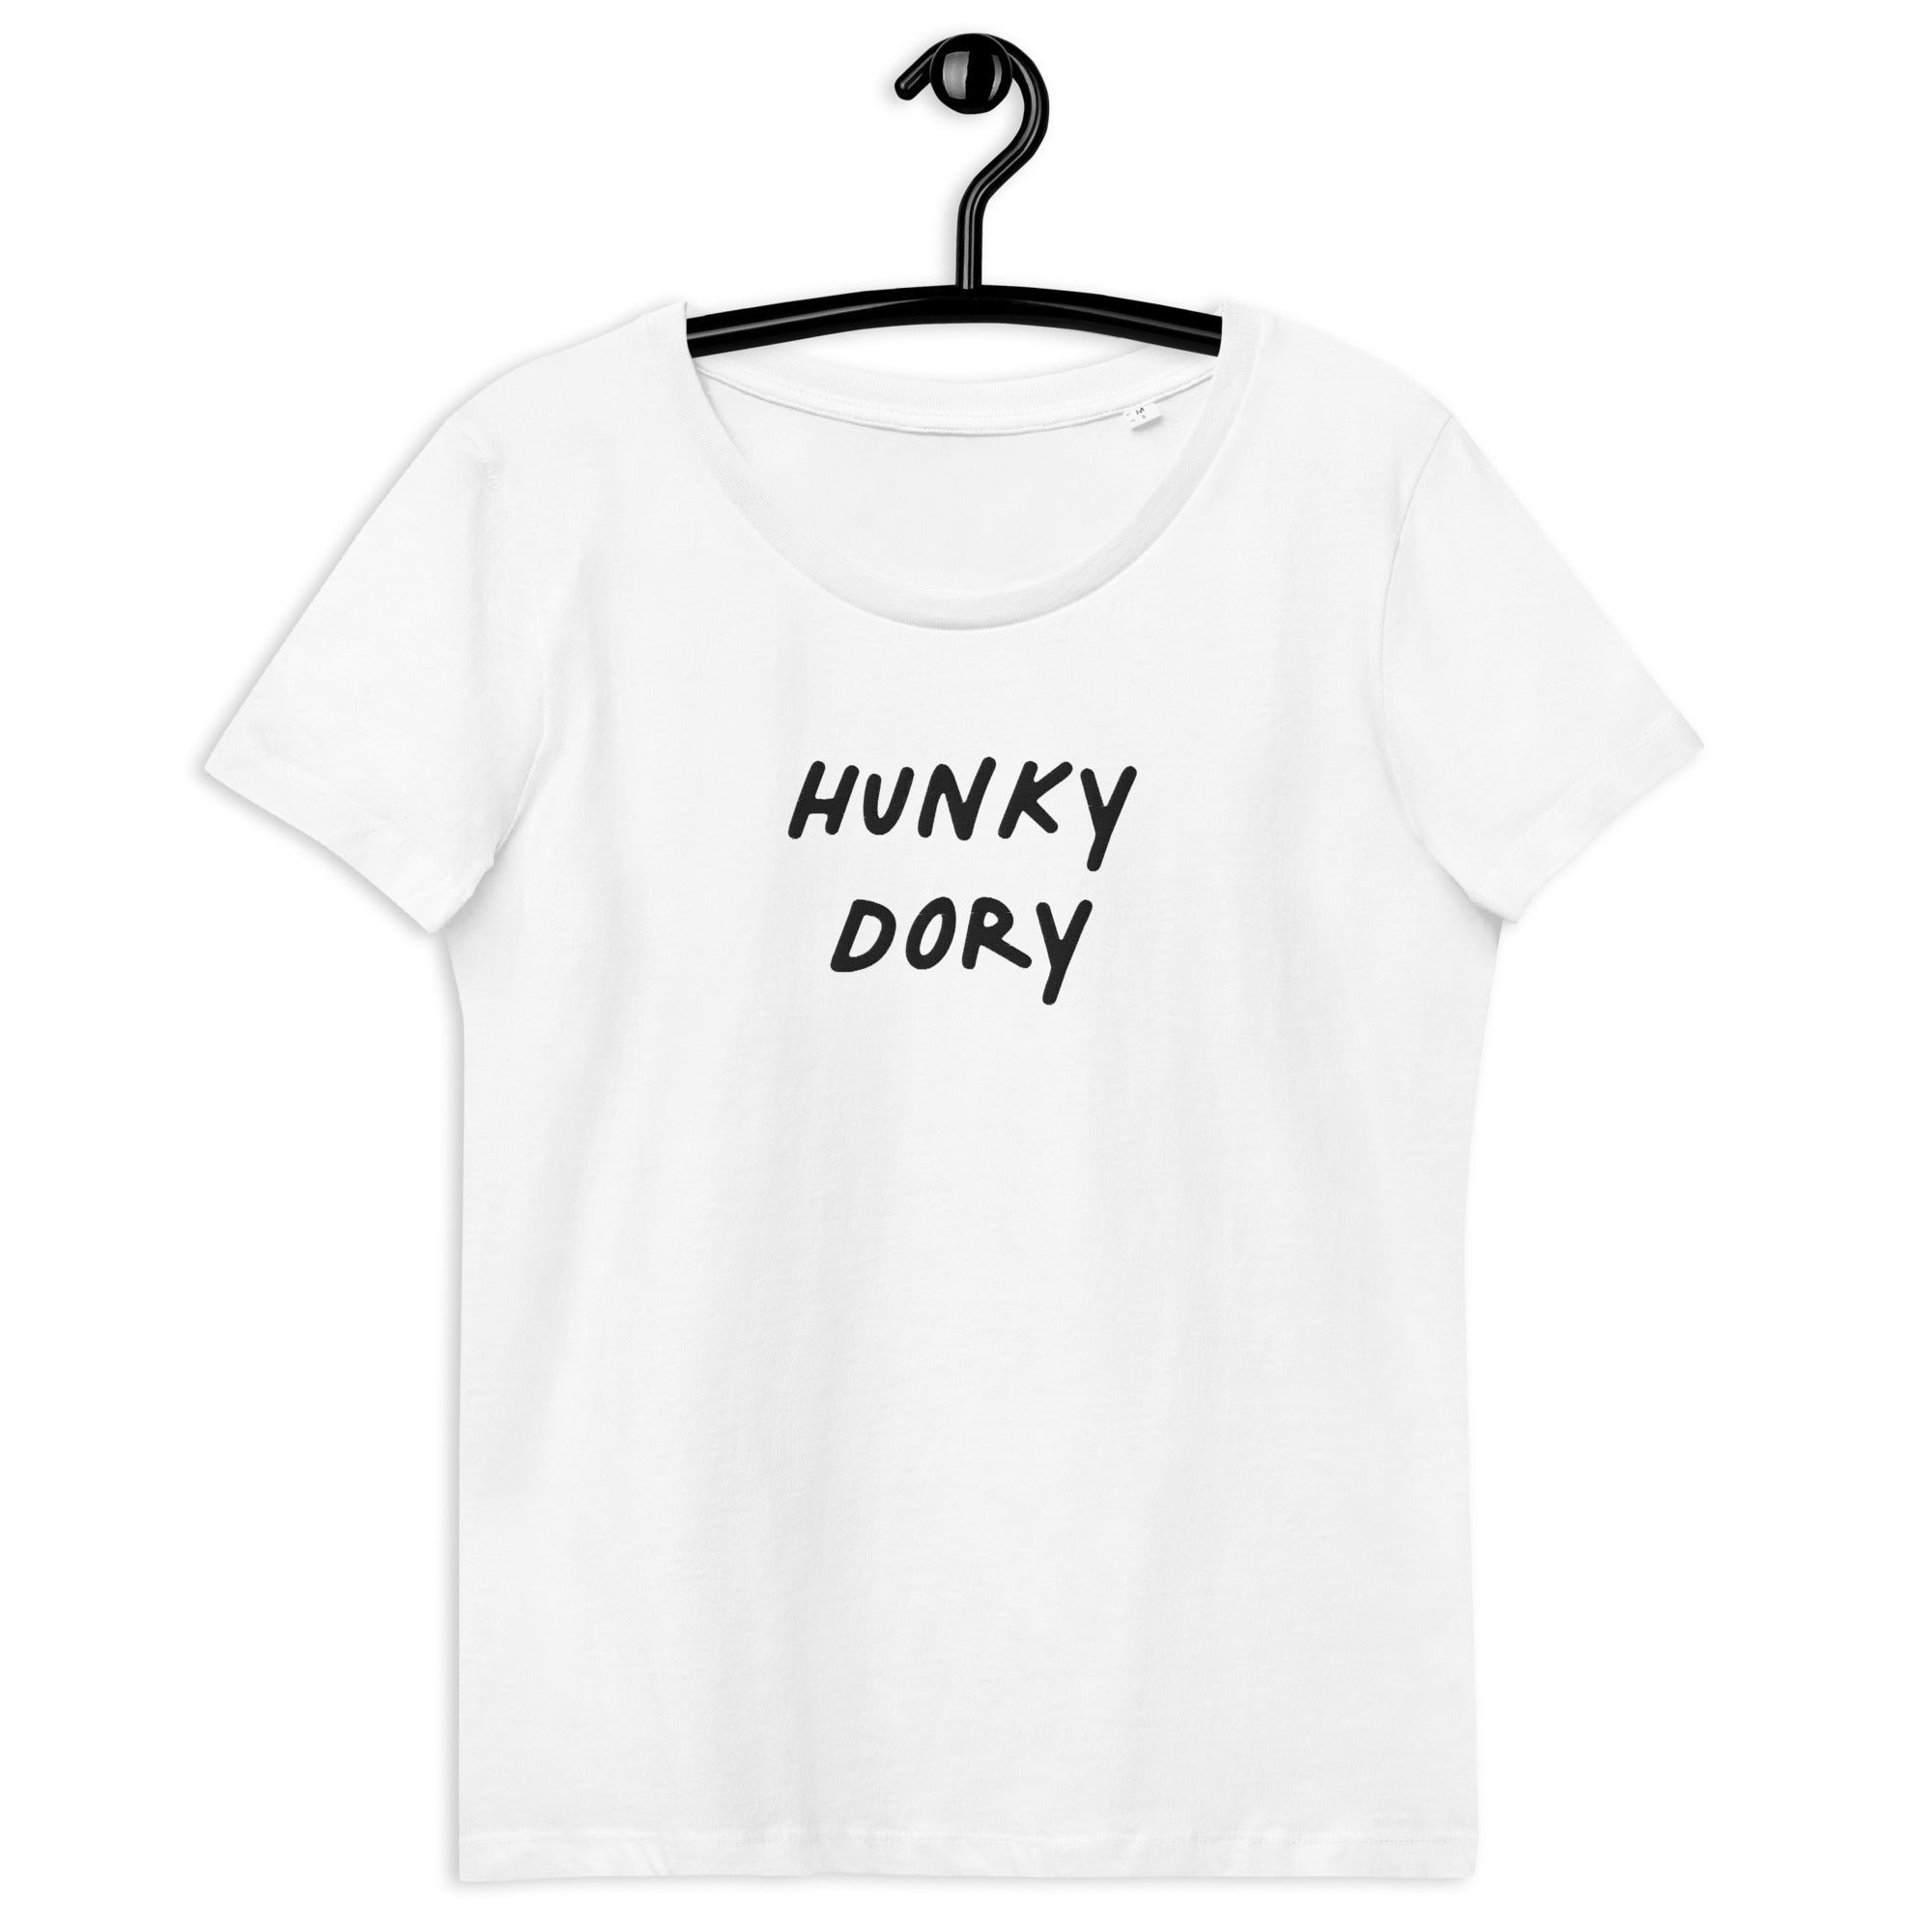 HUNKY DORY Embroidered Women's Fitted Organic T-shirt (black text)